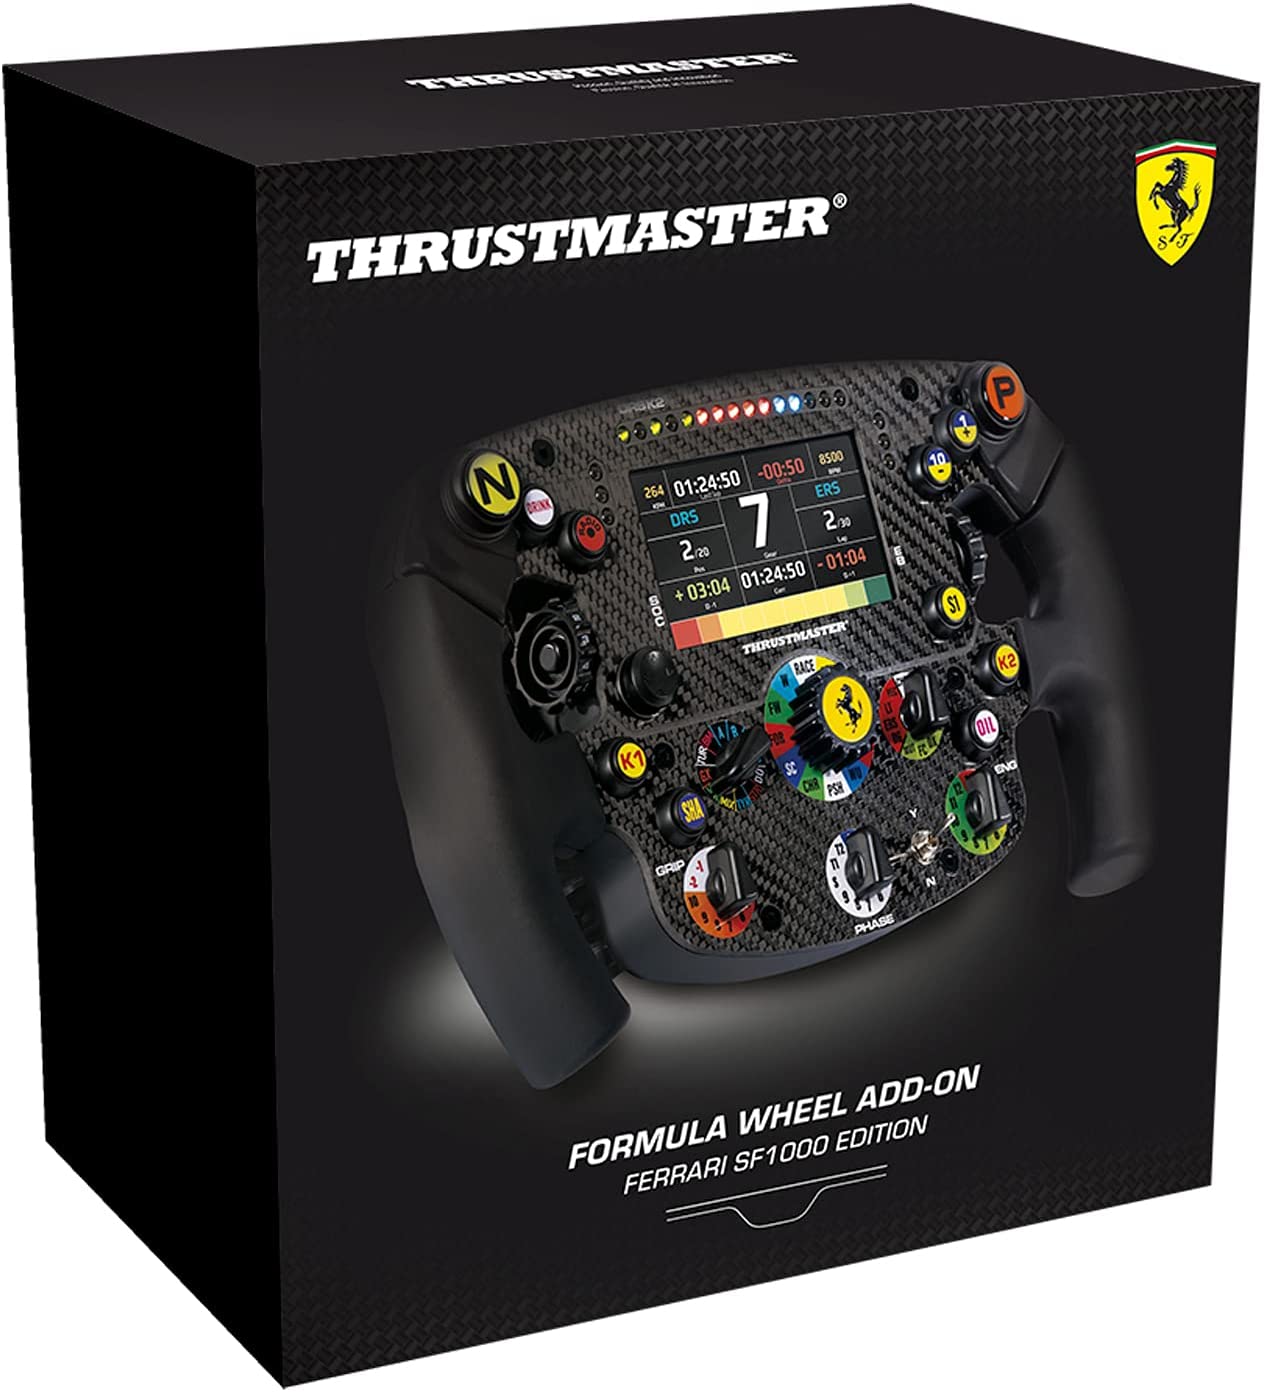 Thrustmaster Formula Wheel Add-On Ferrari SF1000 Edition pour PS5, PS4, Xbox Series X|S, Xbox One et PC